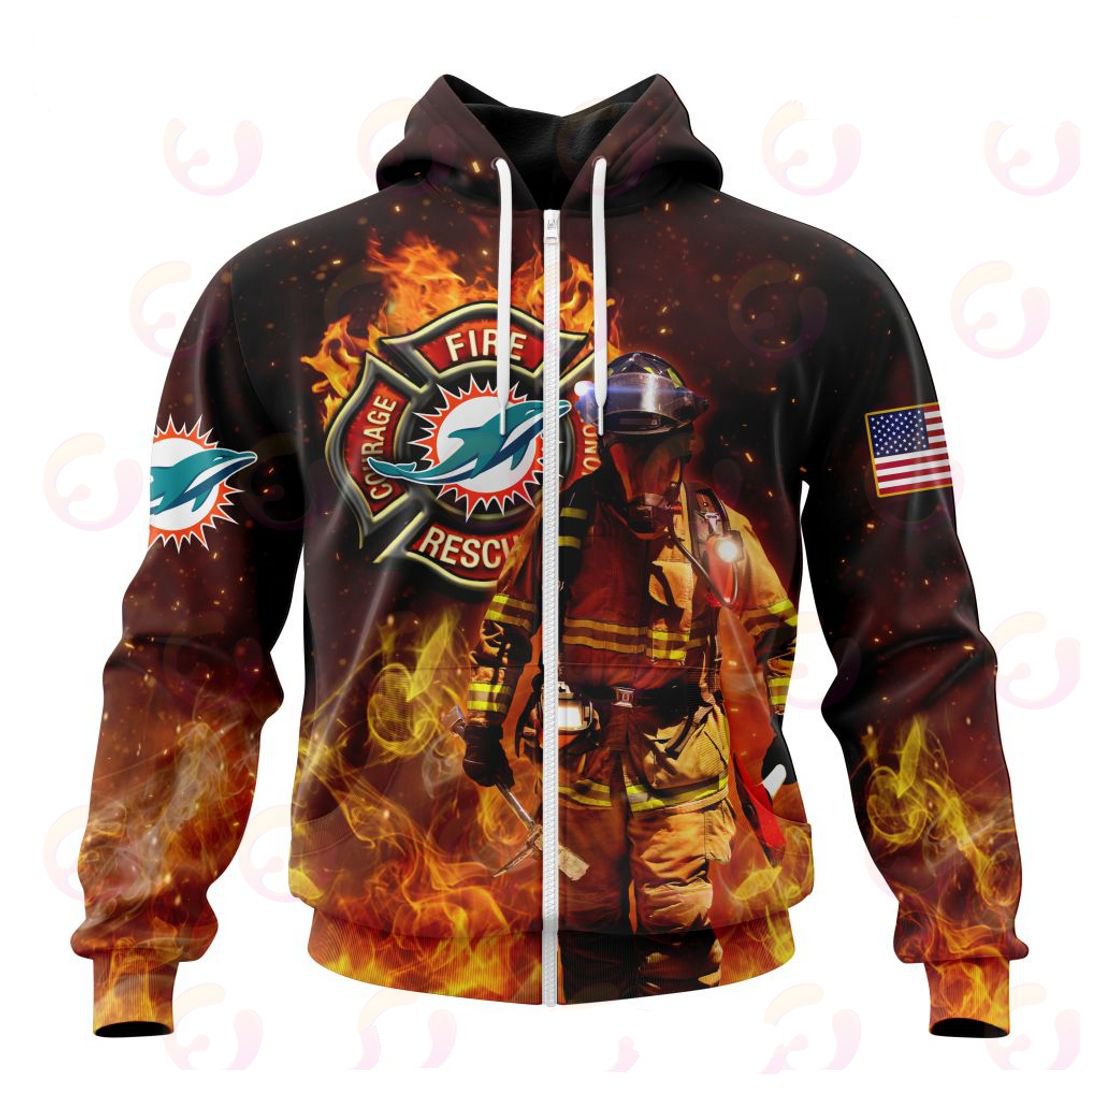 MIAMI DOLPHINS HONOR FIREFIGHTERS – FIRST RESPONDERS 3D HOODIE